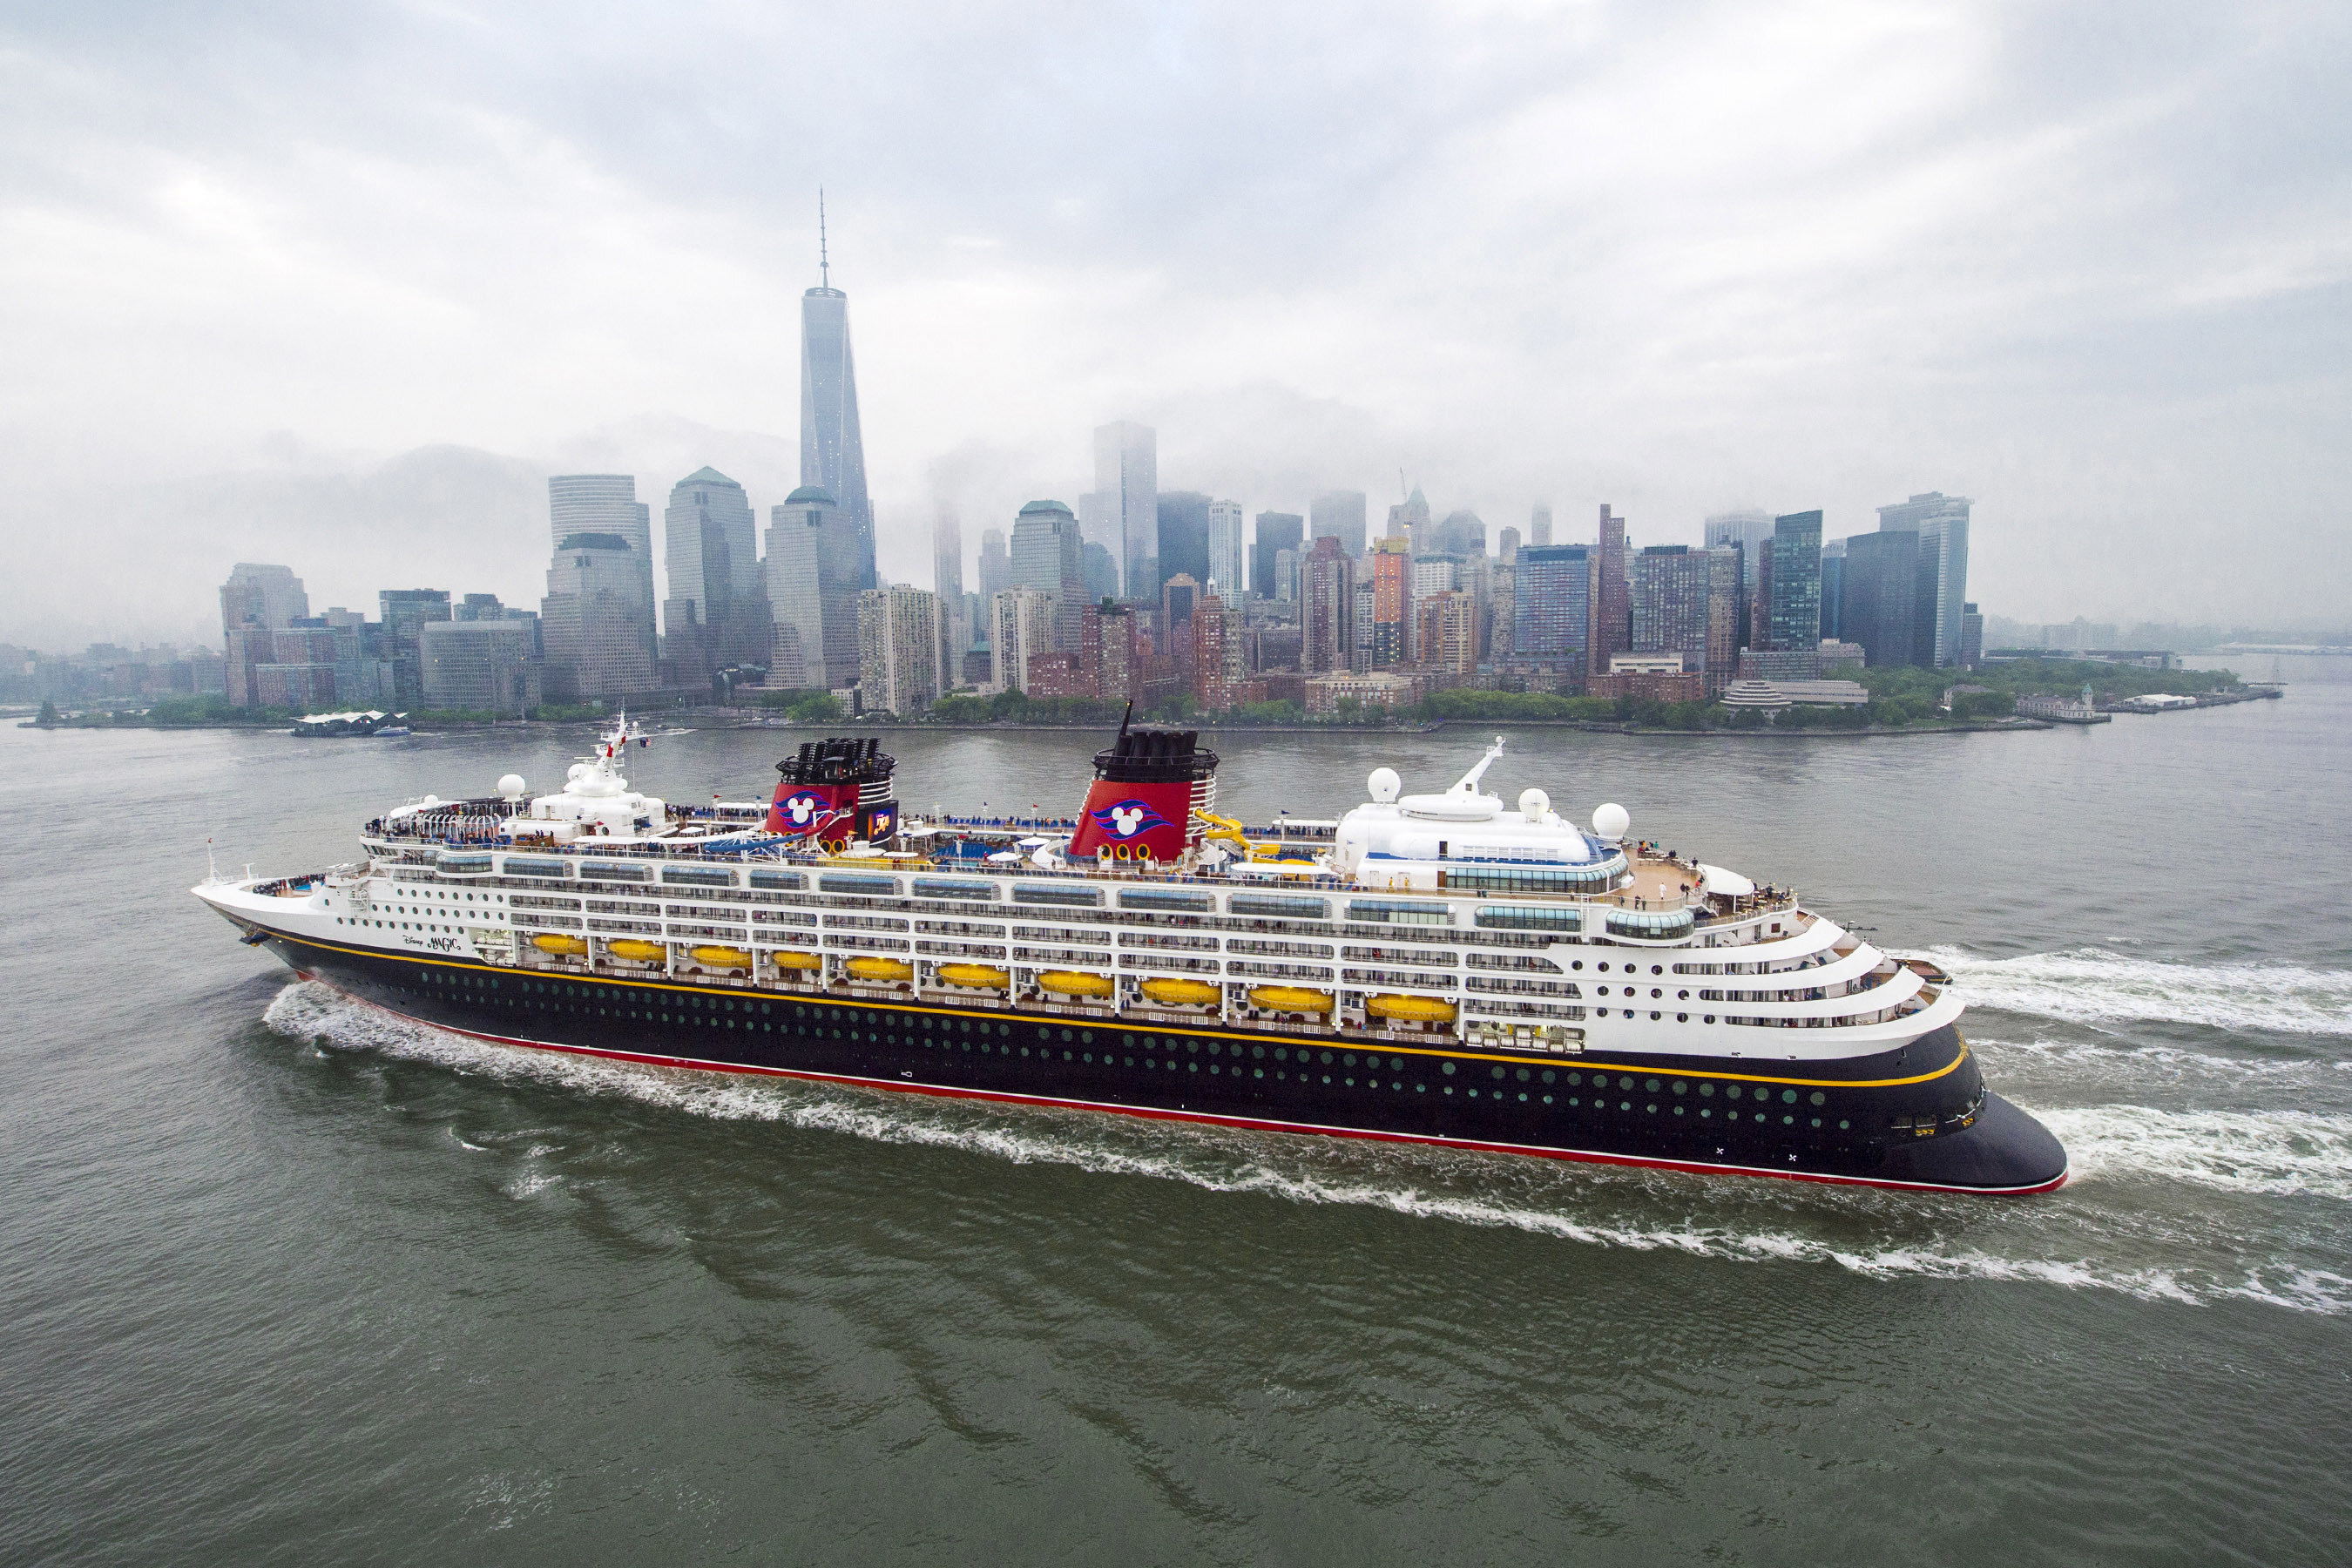 Disney Cruise Line returns to New York City in fall 2017 with a mix of voyages to the Canada coast and the Bahamas, which includes a stop at Disney's private island, Castaway Cay. (Chloe Rice, photographer).